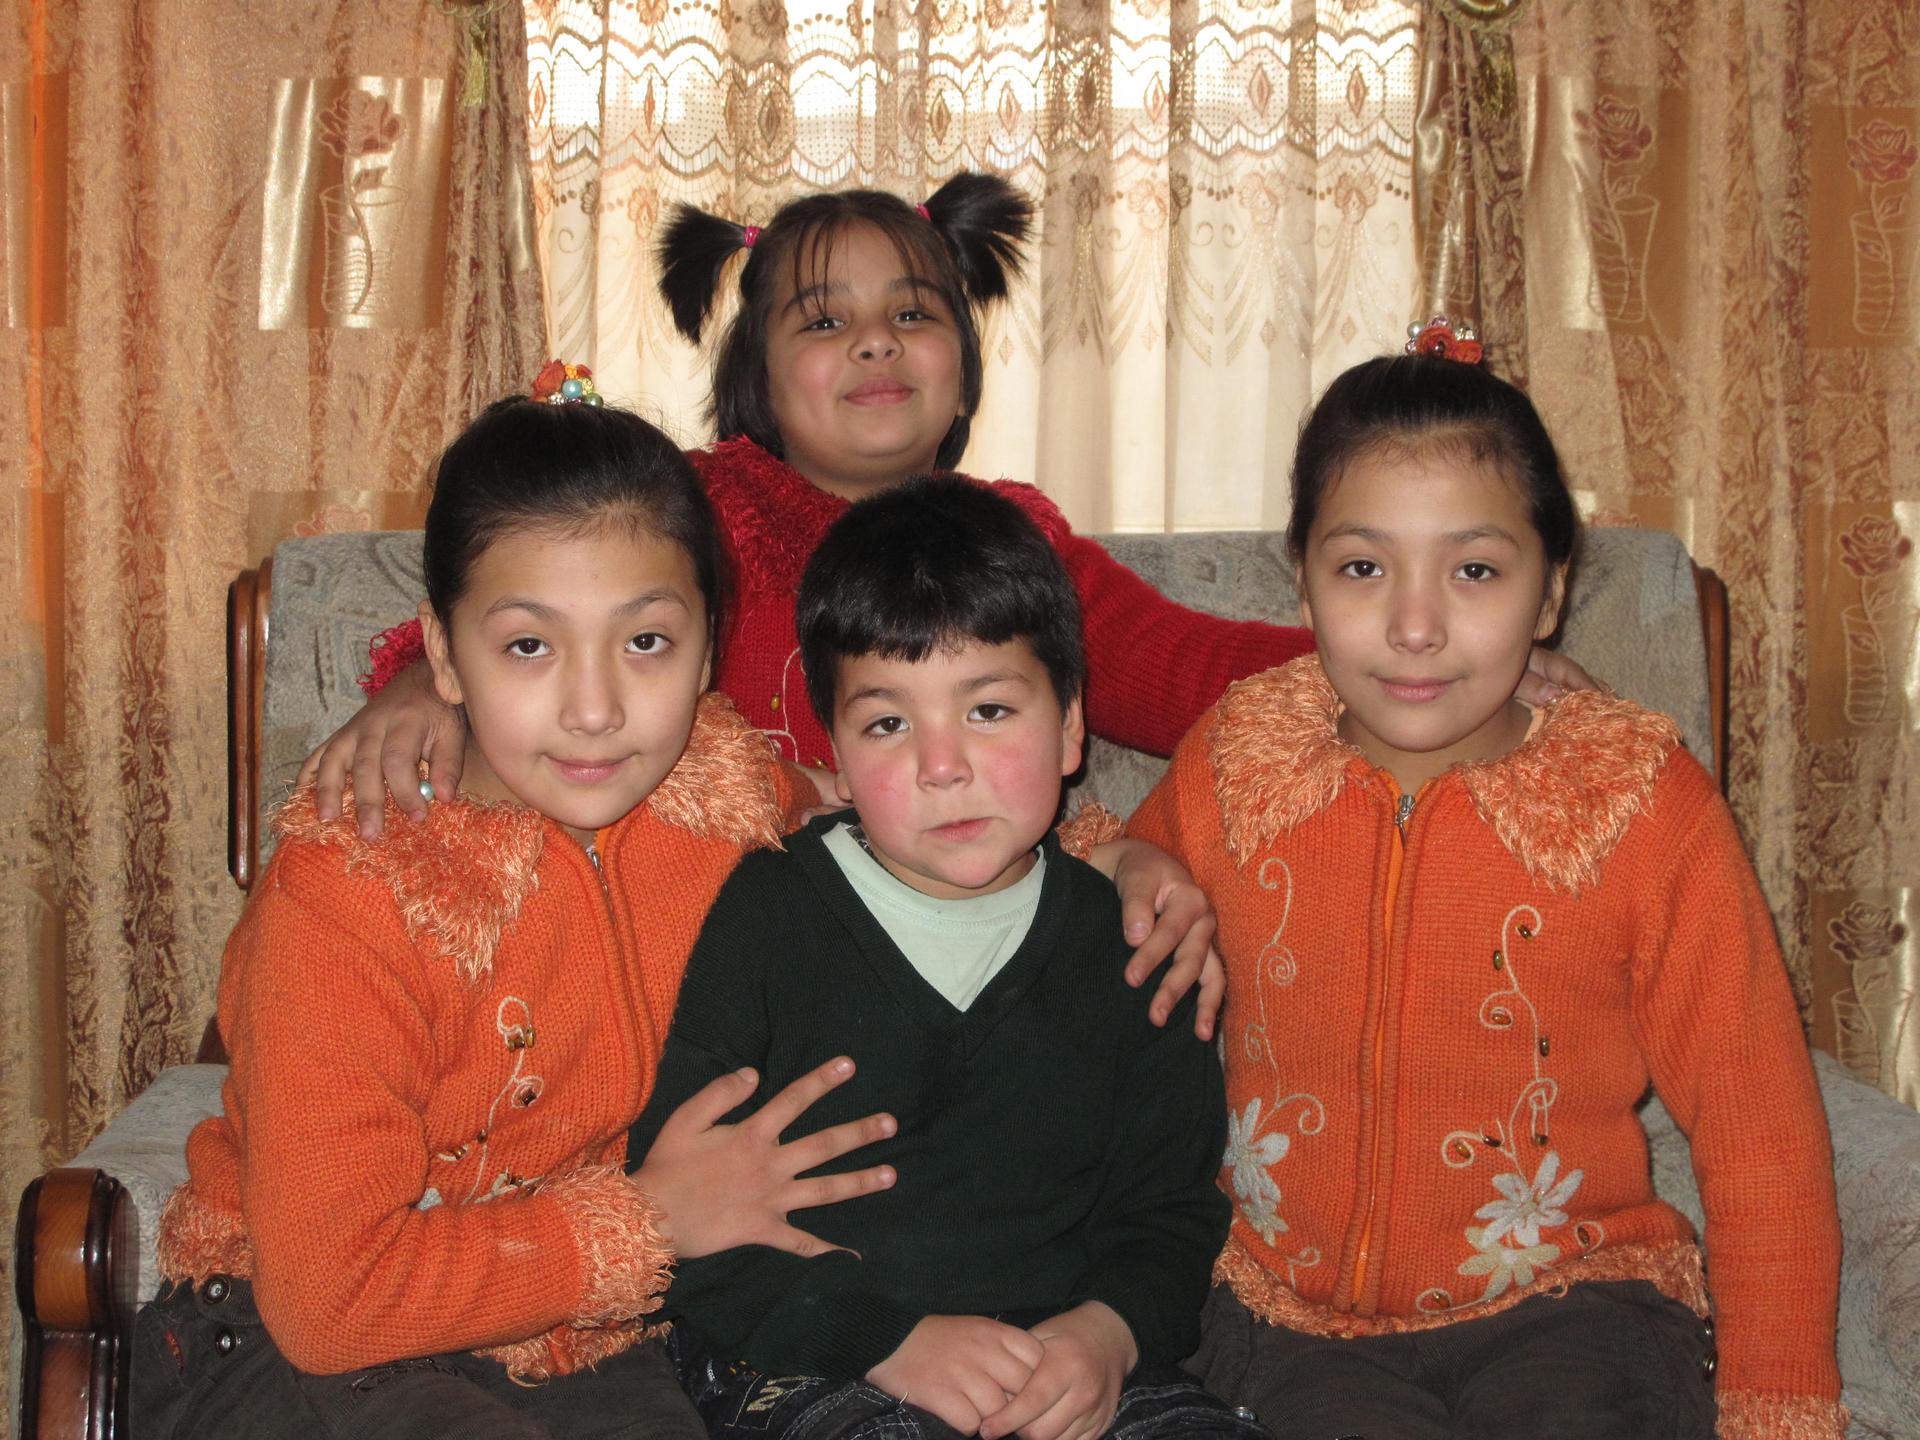 Mehran, a bacha posh featured in the book poses with her sisters